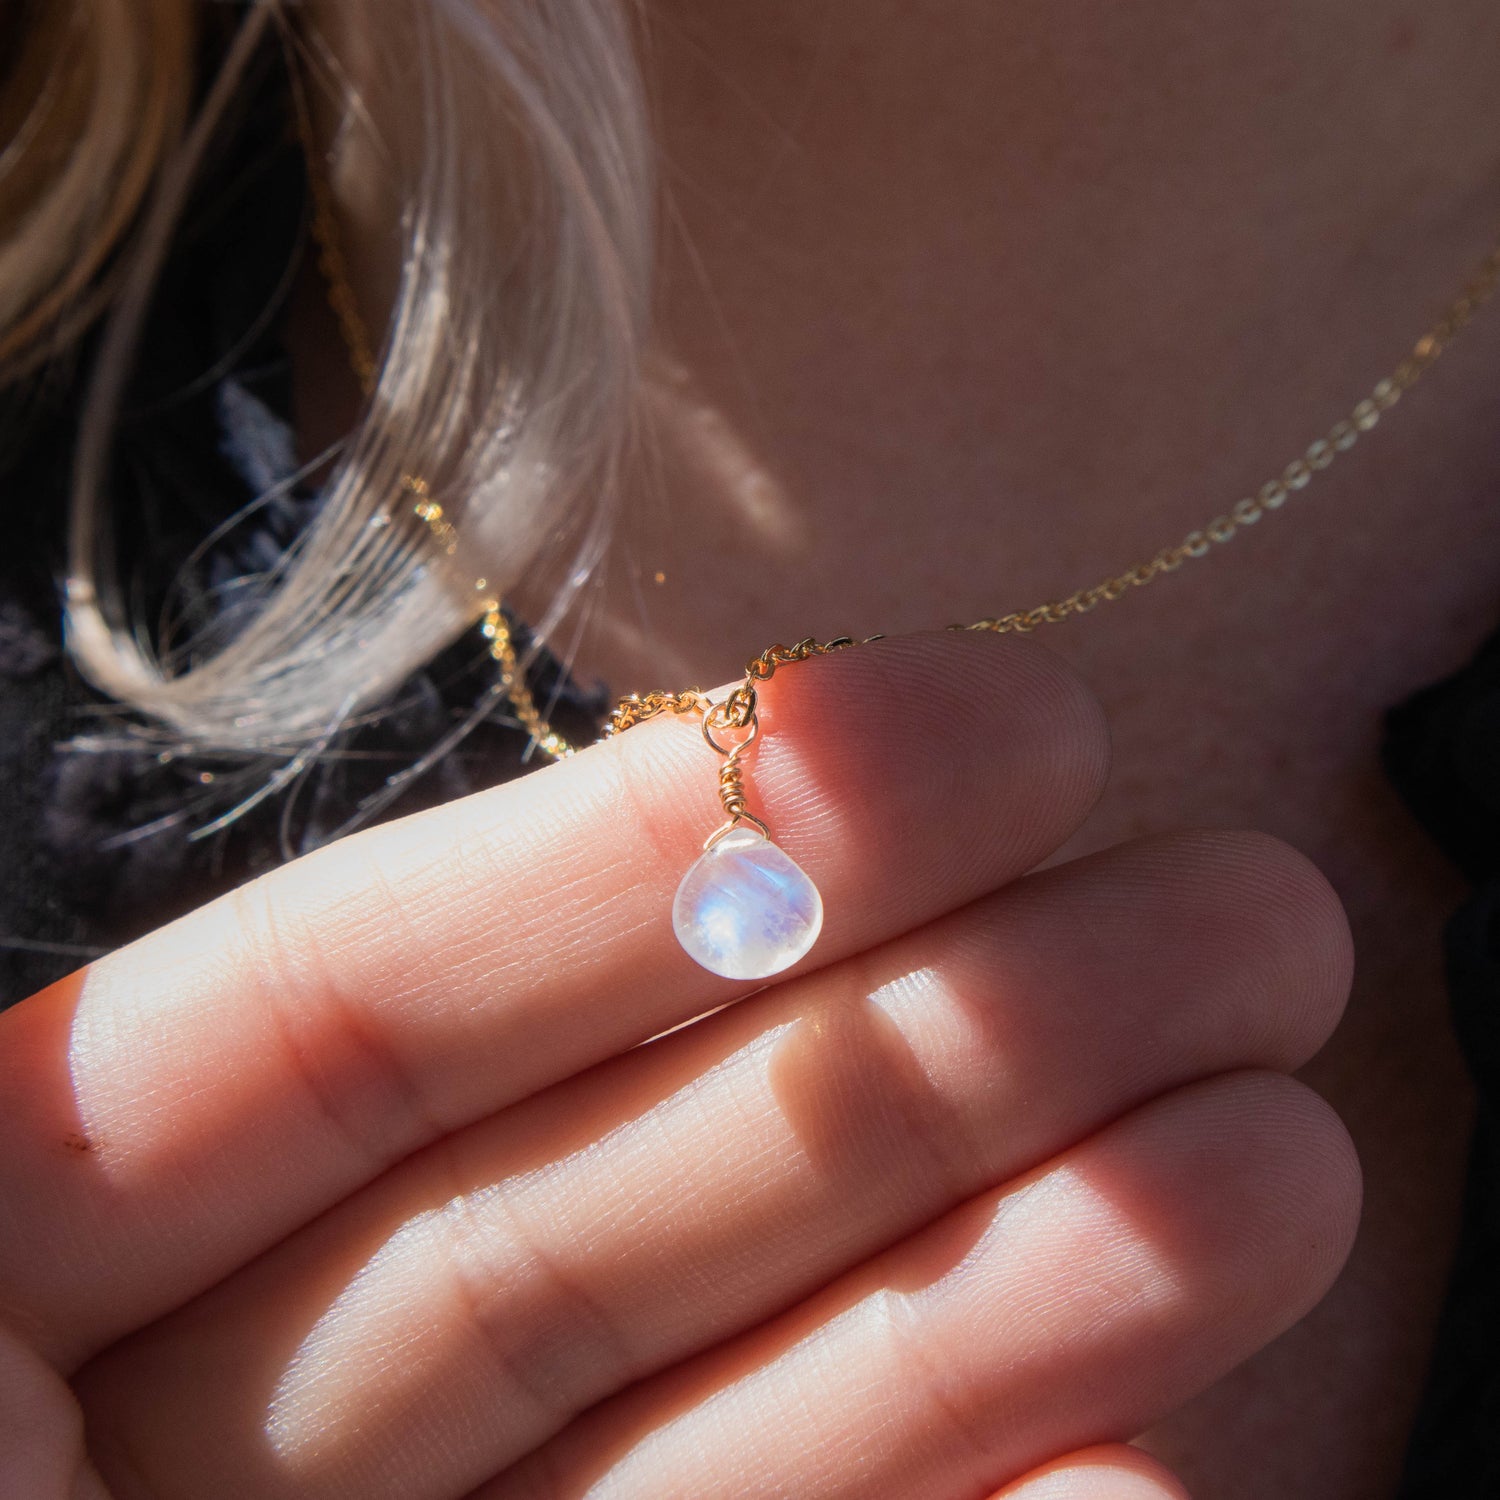 moonstone, moonstone necklace, gold plated moonstone necklace, moonstone jewelry, crystal jewelry, crystal necklace, gemstone jewelry, gemstone necklace, moonstone crystal, moonstone properties, moonstone healing properties, moonstone metaphysical properties, moonstone meaning